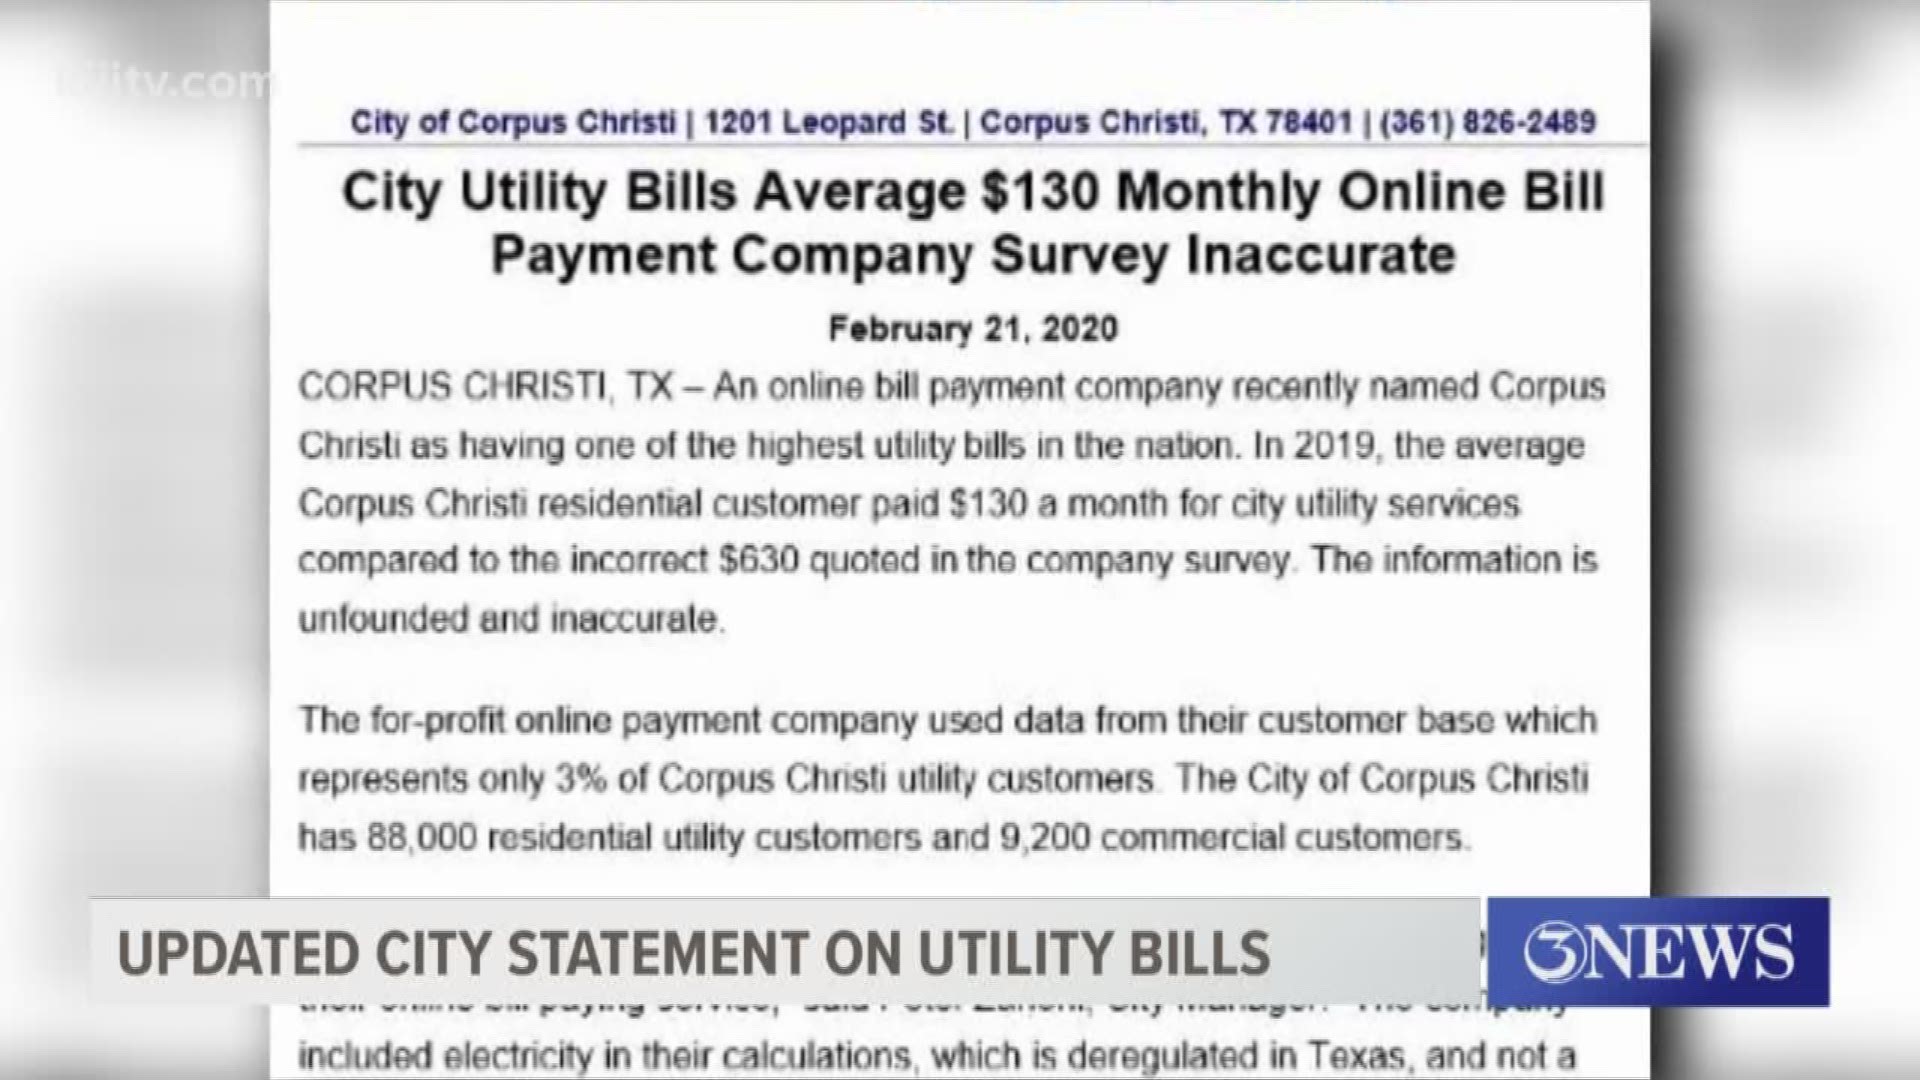 After doing some research and checking on their end, the city has responded to a study claiming that Corpus Christi has the highest average utility bills in the U.S.